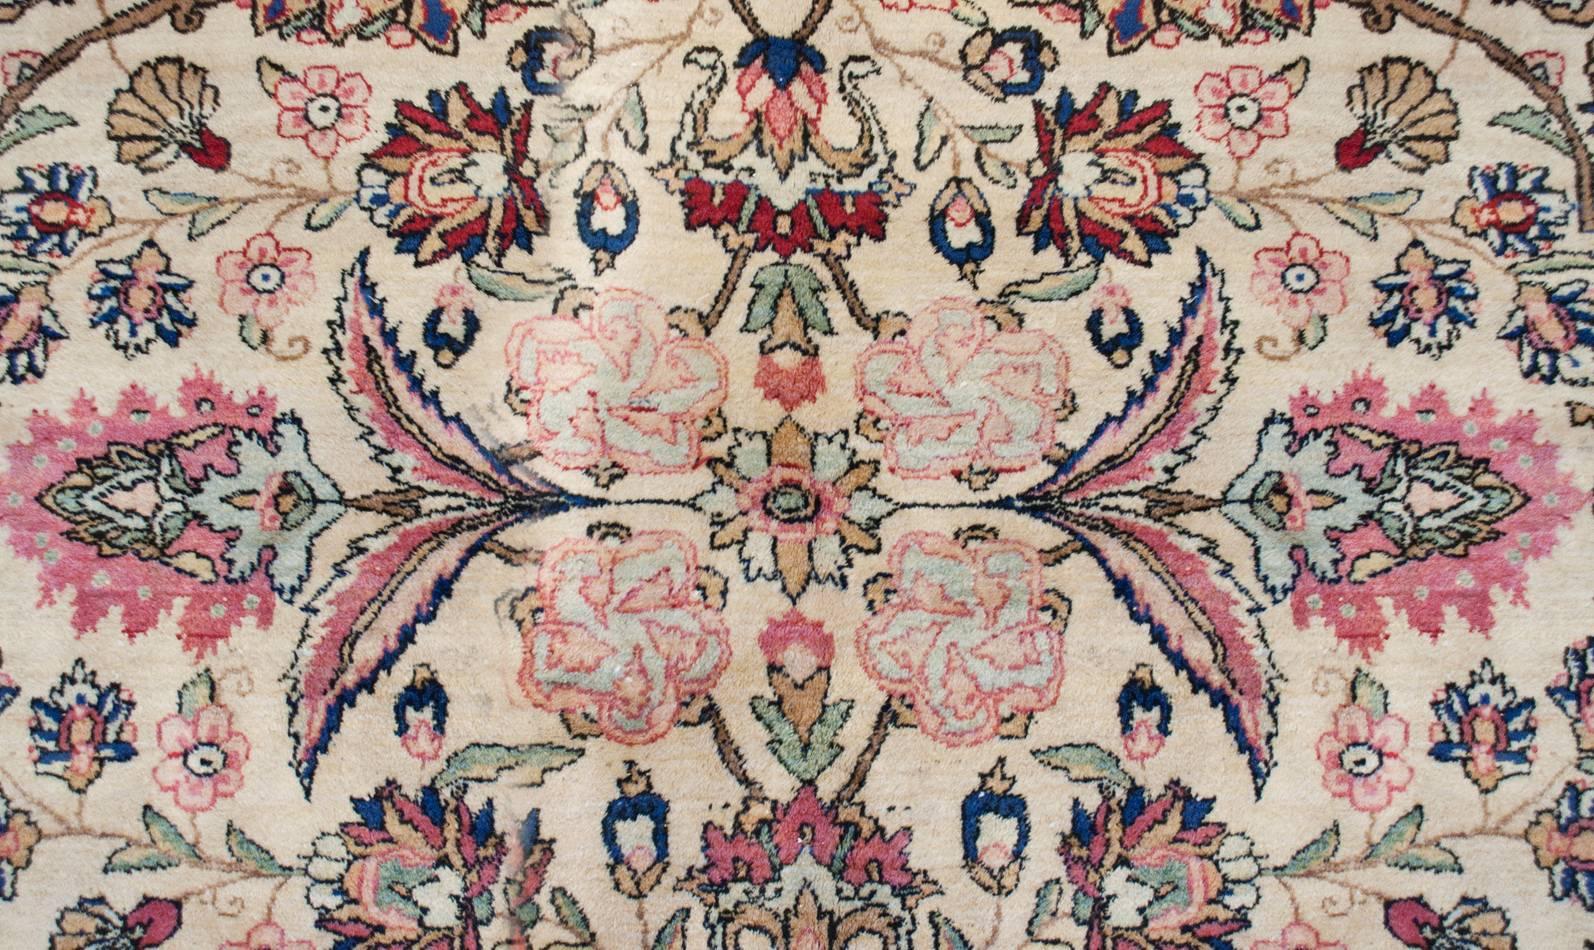 An early 20th century Persian Kirman rug with an intensely woven multi-colored mirrored pattern of scrolling vines and myriad floral varieties on a cream colored background. The border is wide comprised of one wide floral border on a crimson